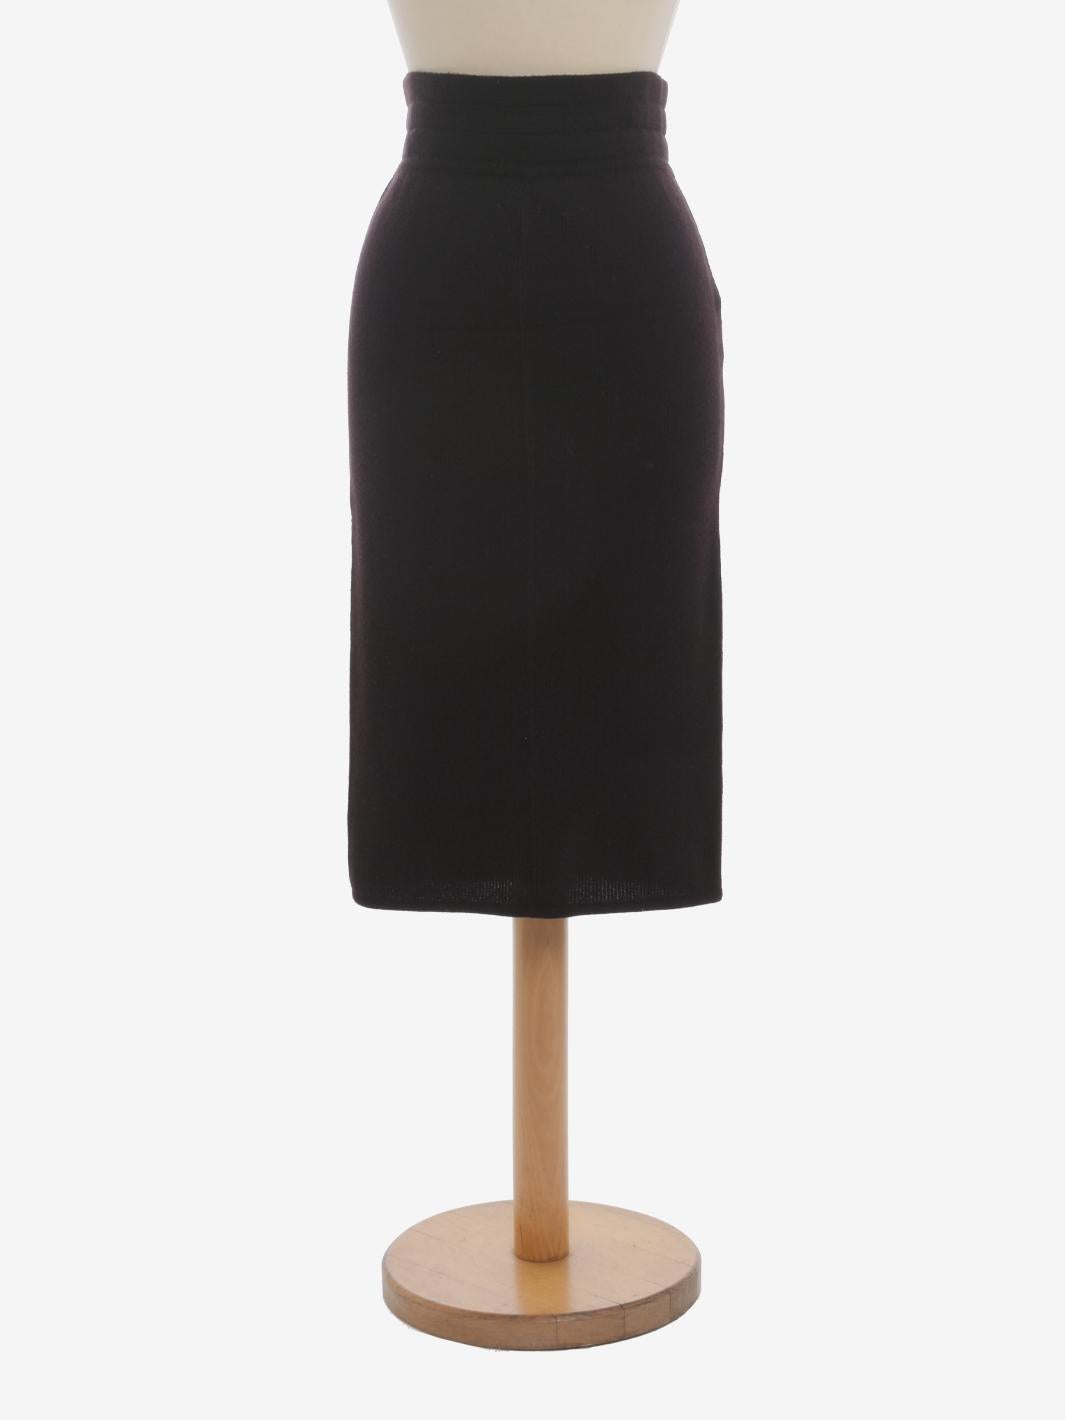 Alaïa Wool Pencil Skirt is a rare longuette made by Azzedine Alaïa in the second half of 1980s characterized by the iconic raised seams that draw the figure with geometric lines, elasticated waistband with back belt loop and made of fine virgin